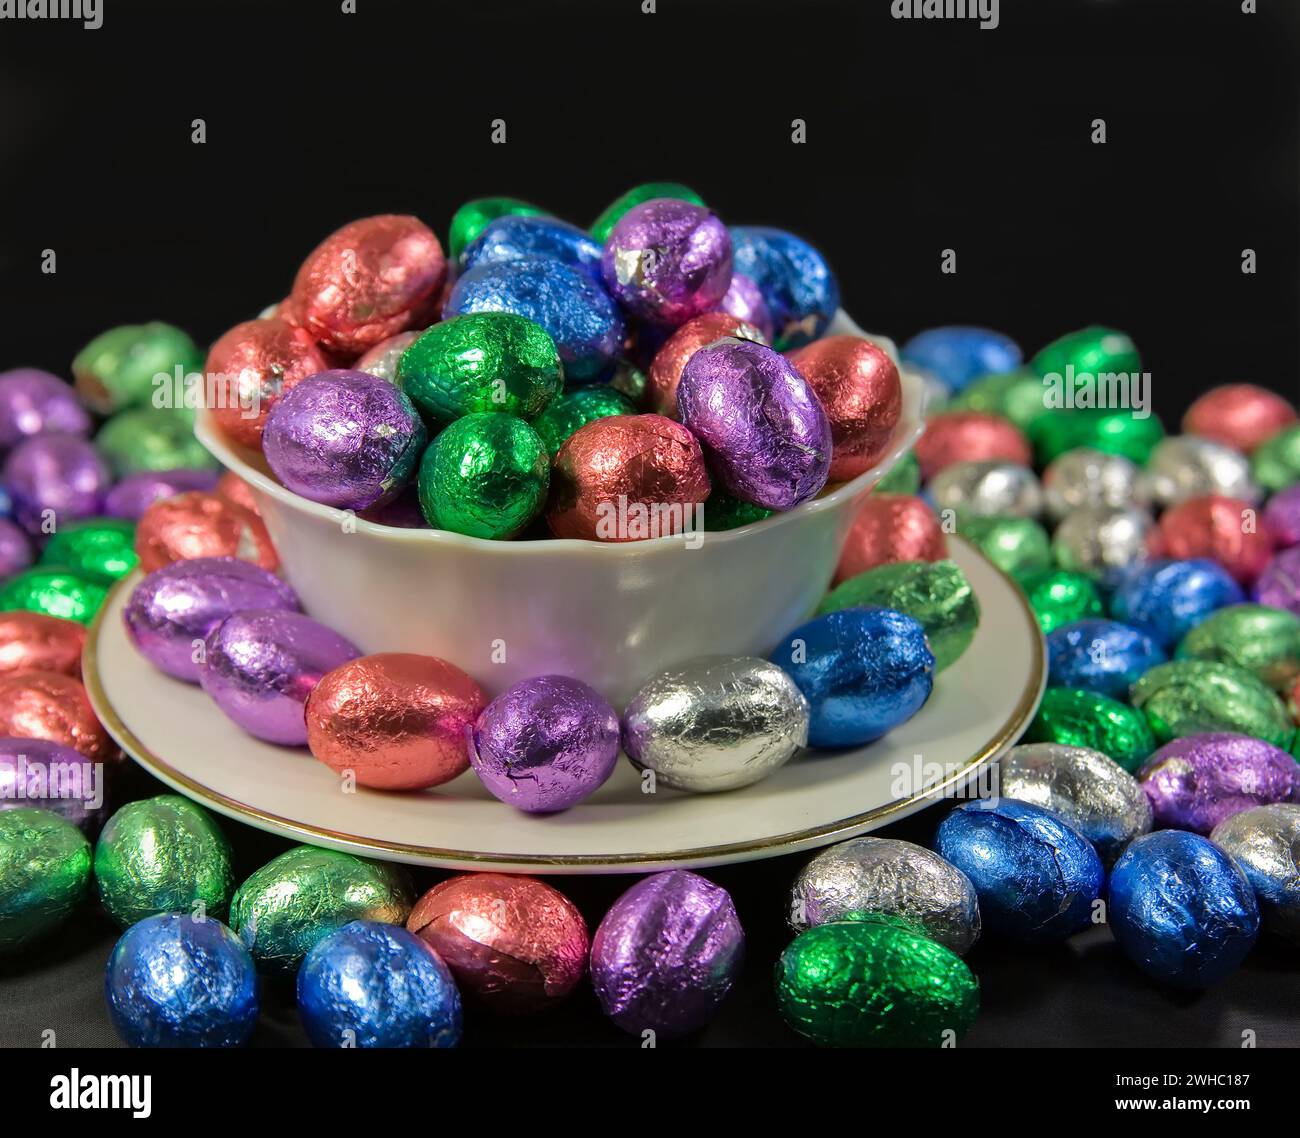 Overflowing bowl and plate of easter eggs on black Stock Photo